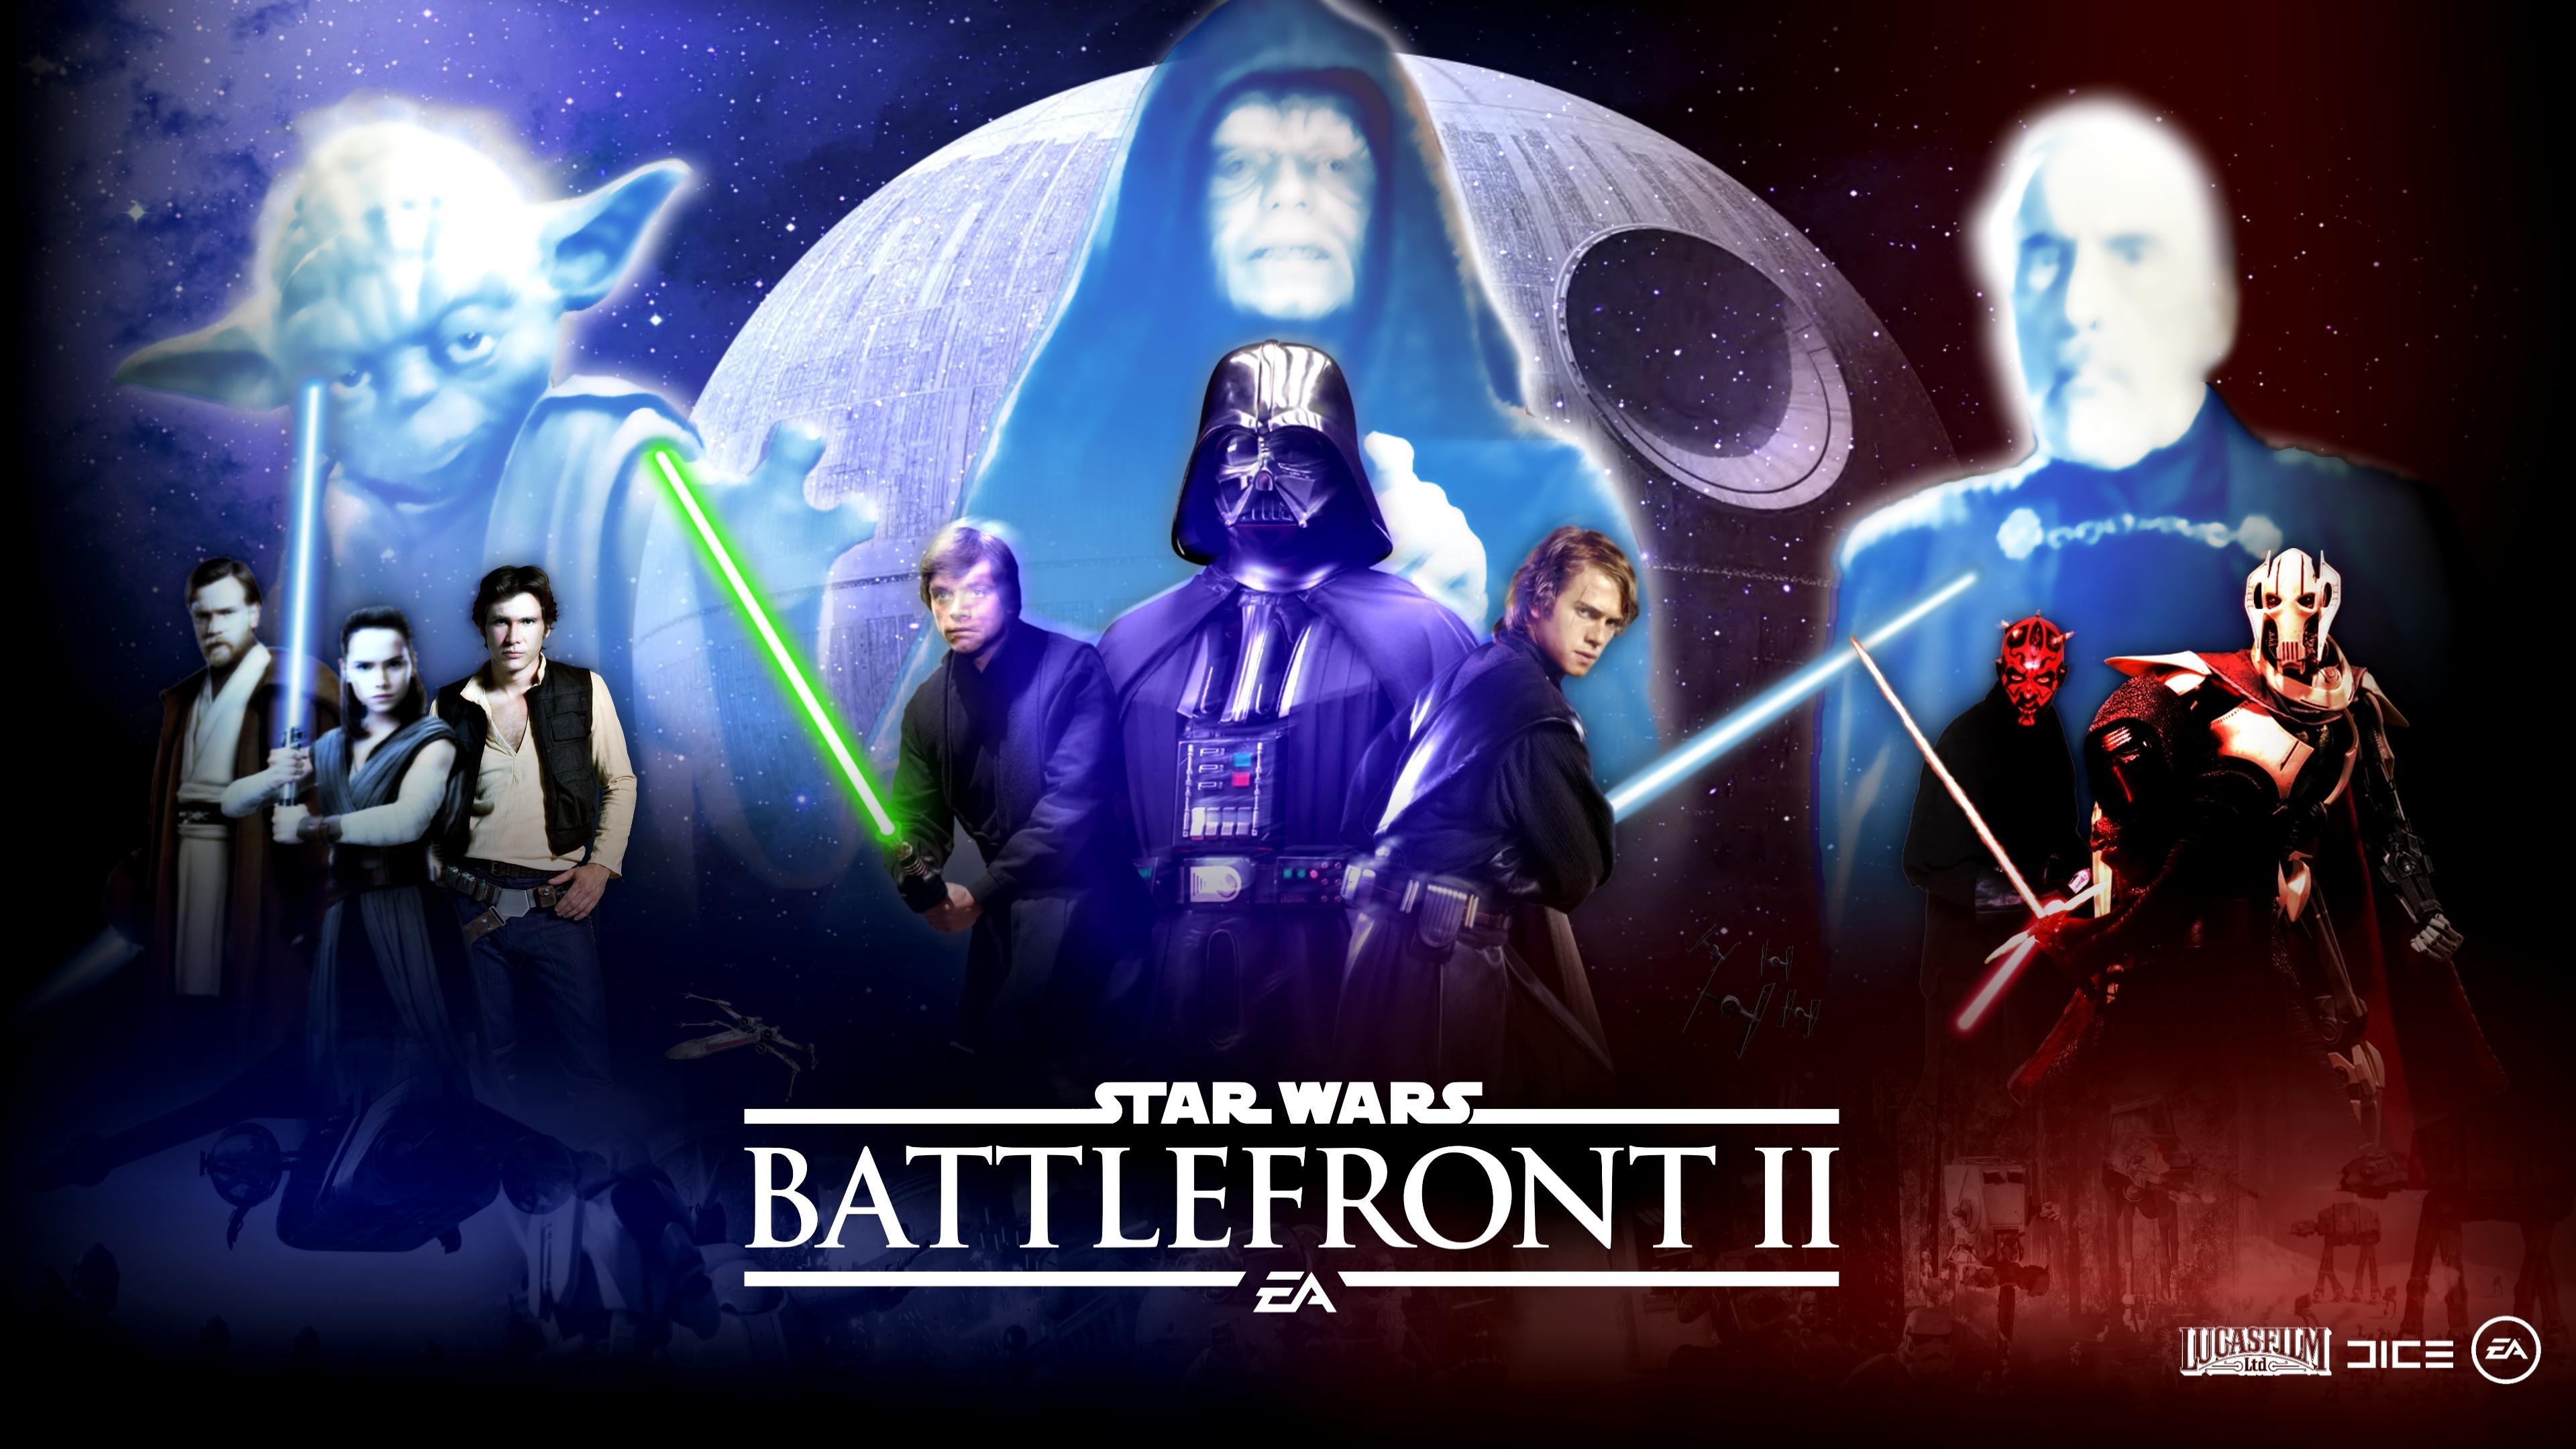 Star Wars 9 The Movie HD Quality: Star Wars Battlefront 2 Heroes